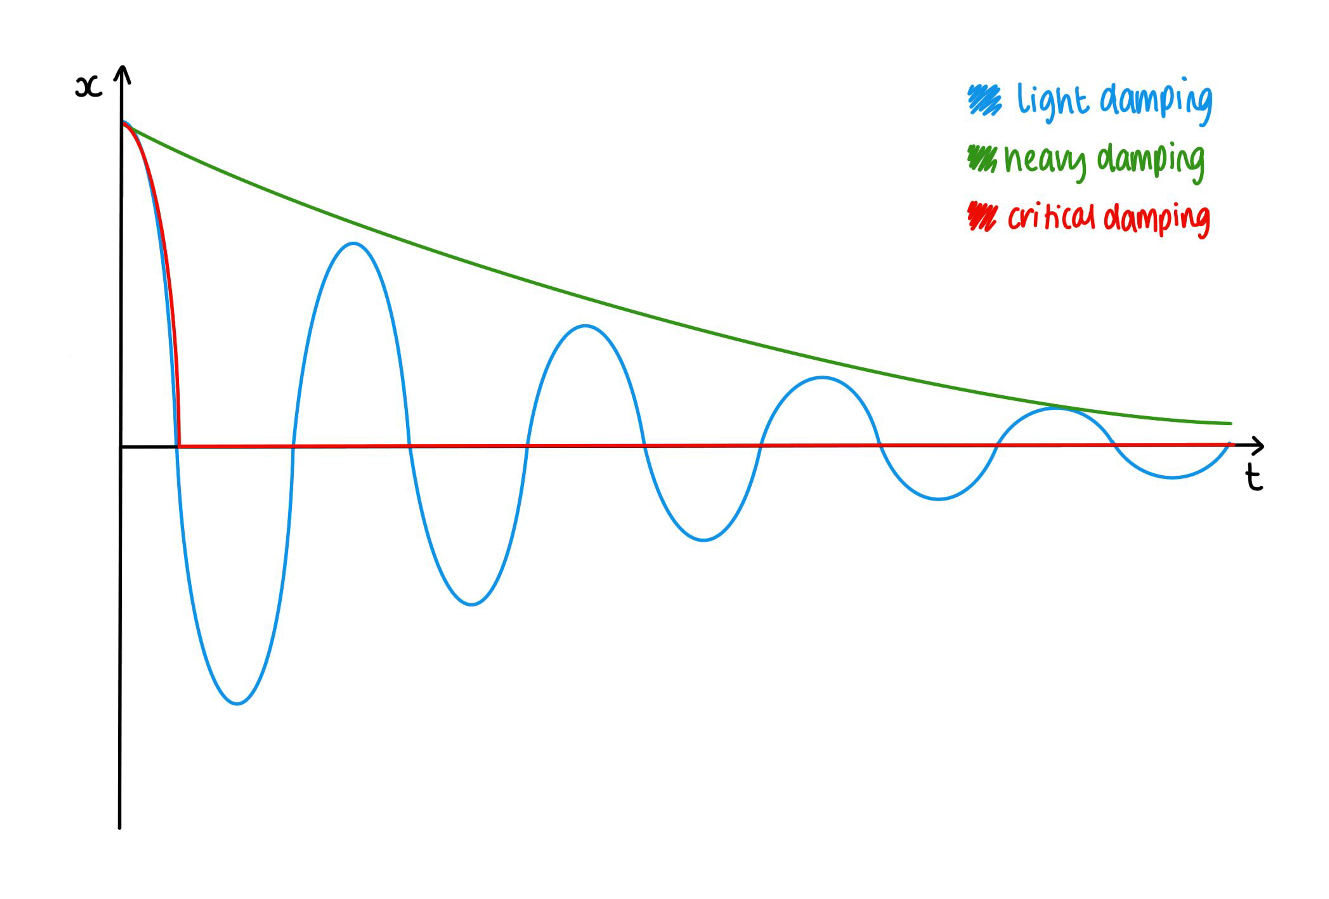 <p><span><br>Light damping occurs naturally (e.g. pendulum oscillating in air), and the amplitude decreases exponentially (but time period remains constant as A and T are independent). When heavy damping occurs (e.g. pendulum oscillating in water) the amplitude decreases dramatically. In critical damping (e.g. pendulum oscillating in treacle) the object is stopped in as short a time as possible without overshooting equilibrium.</span></p>